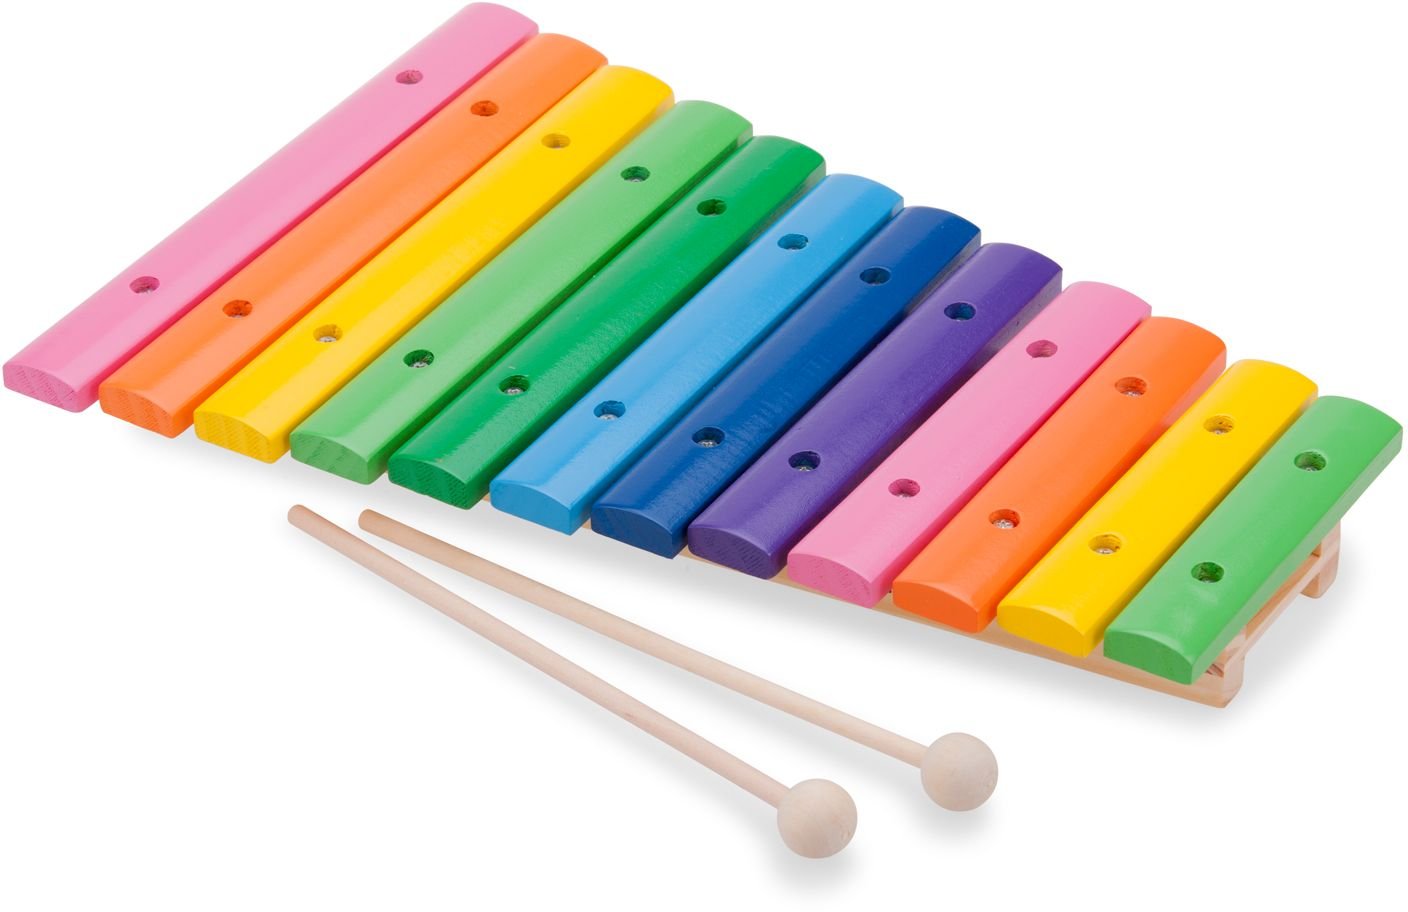 Eitech New Classic Toys Musical Instrument Xylophone Tones Wood